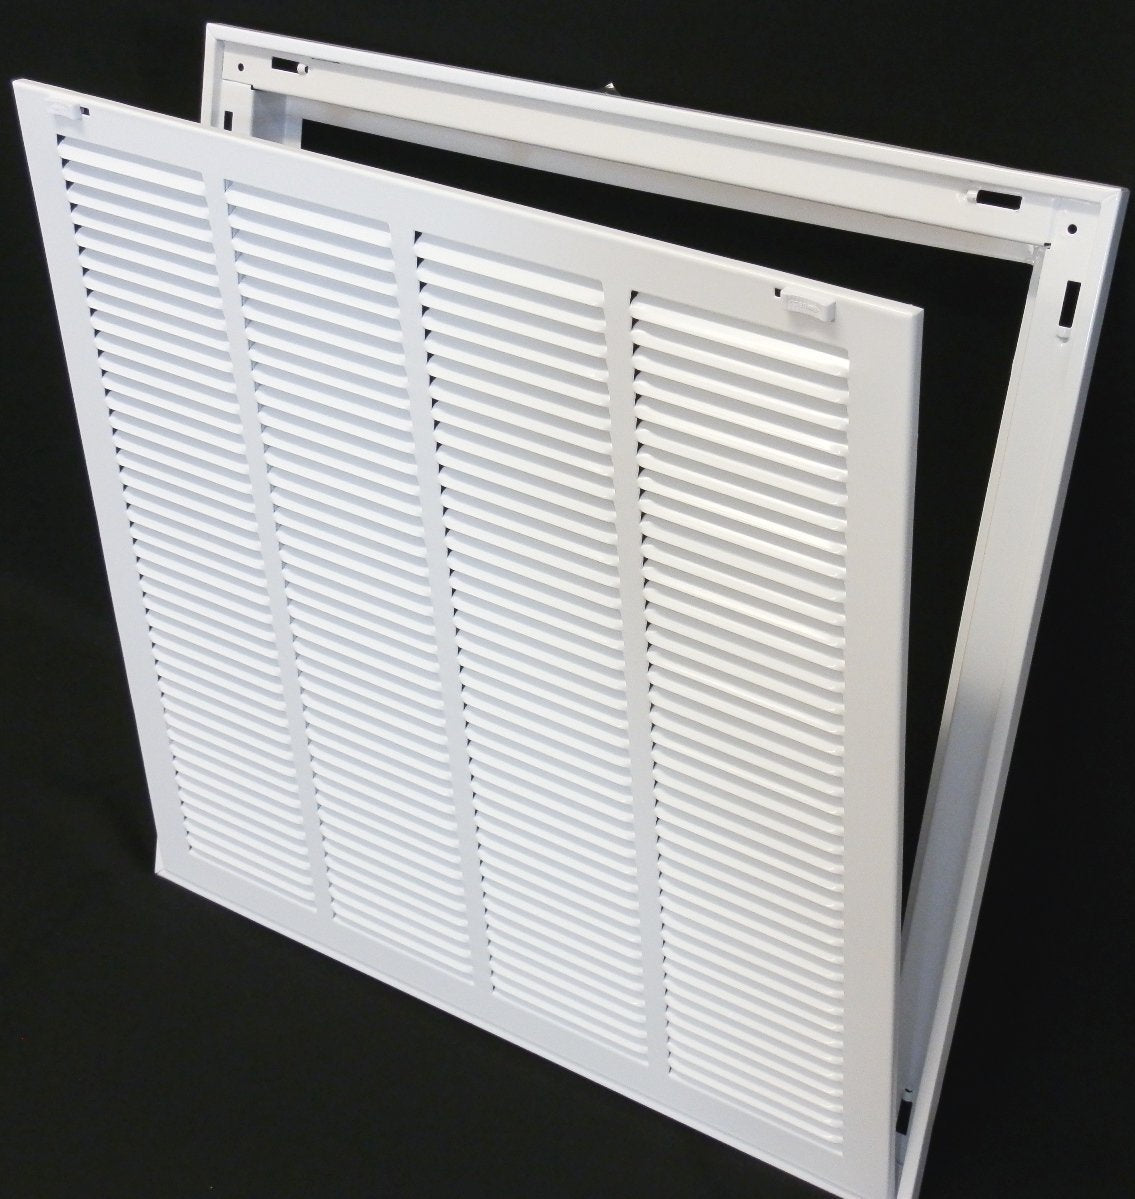 34&quot; X 26&quot; Steel Return Air Filter Grille for 1&quot; Filter - Removable Frame - [Outer Dimensions: 36 5/8&quot; X 28 5/8&quot;]